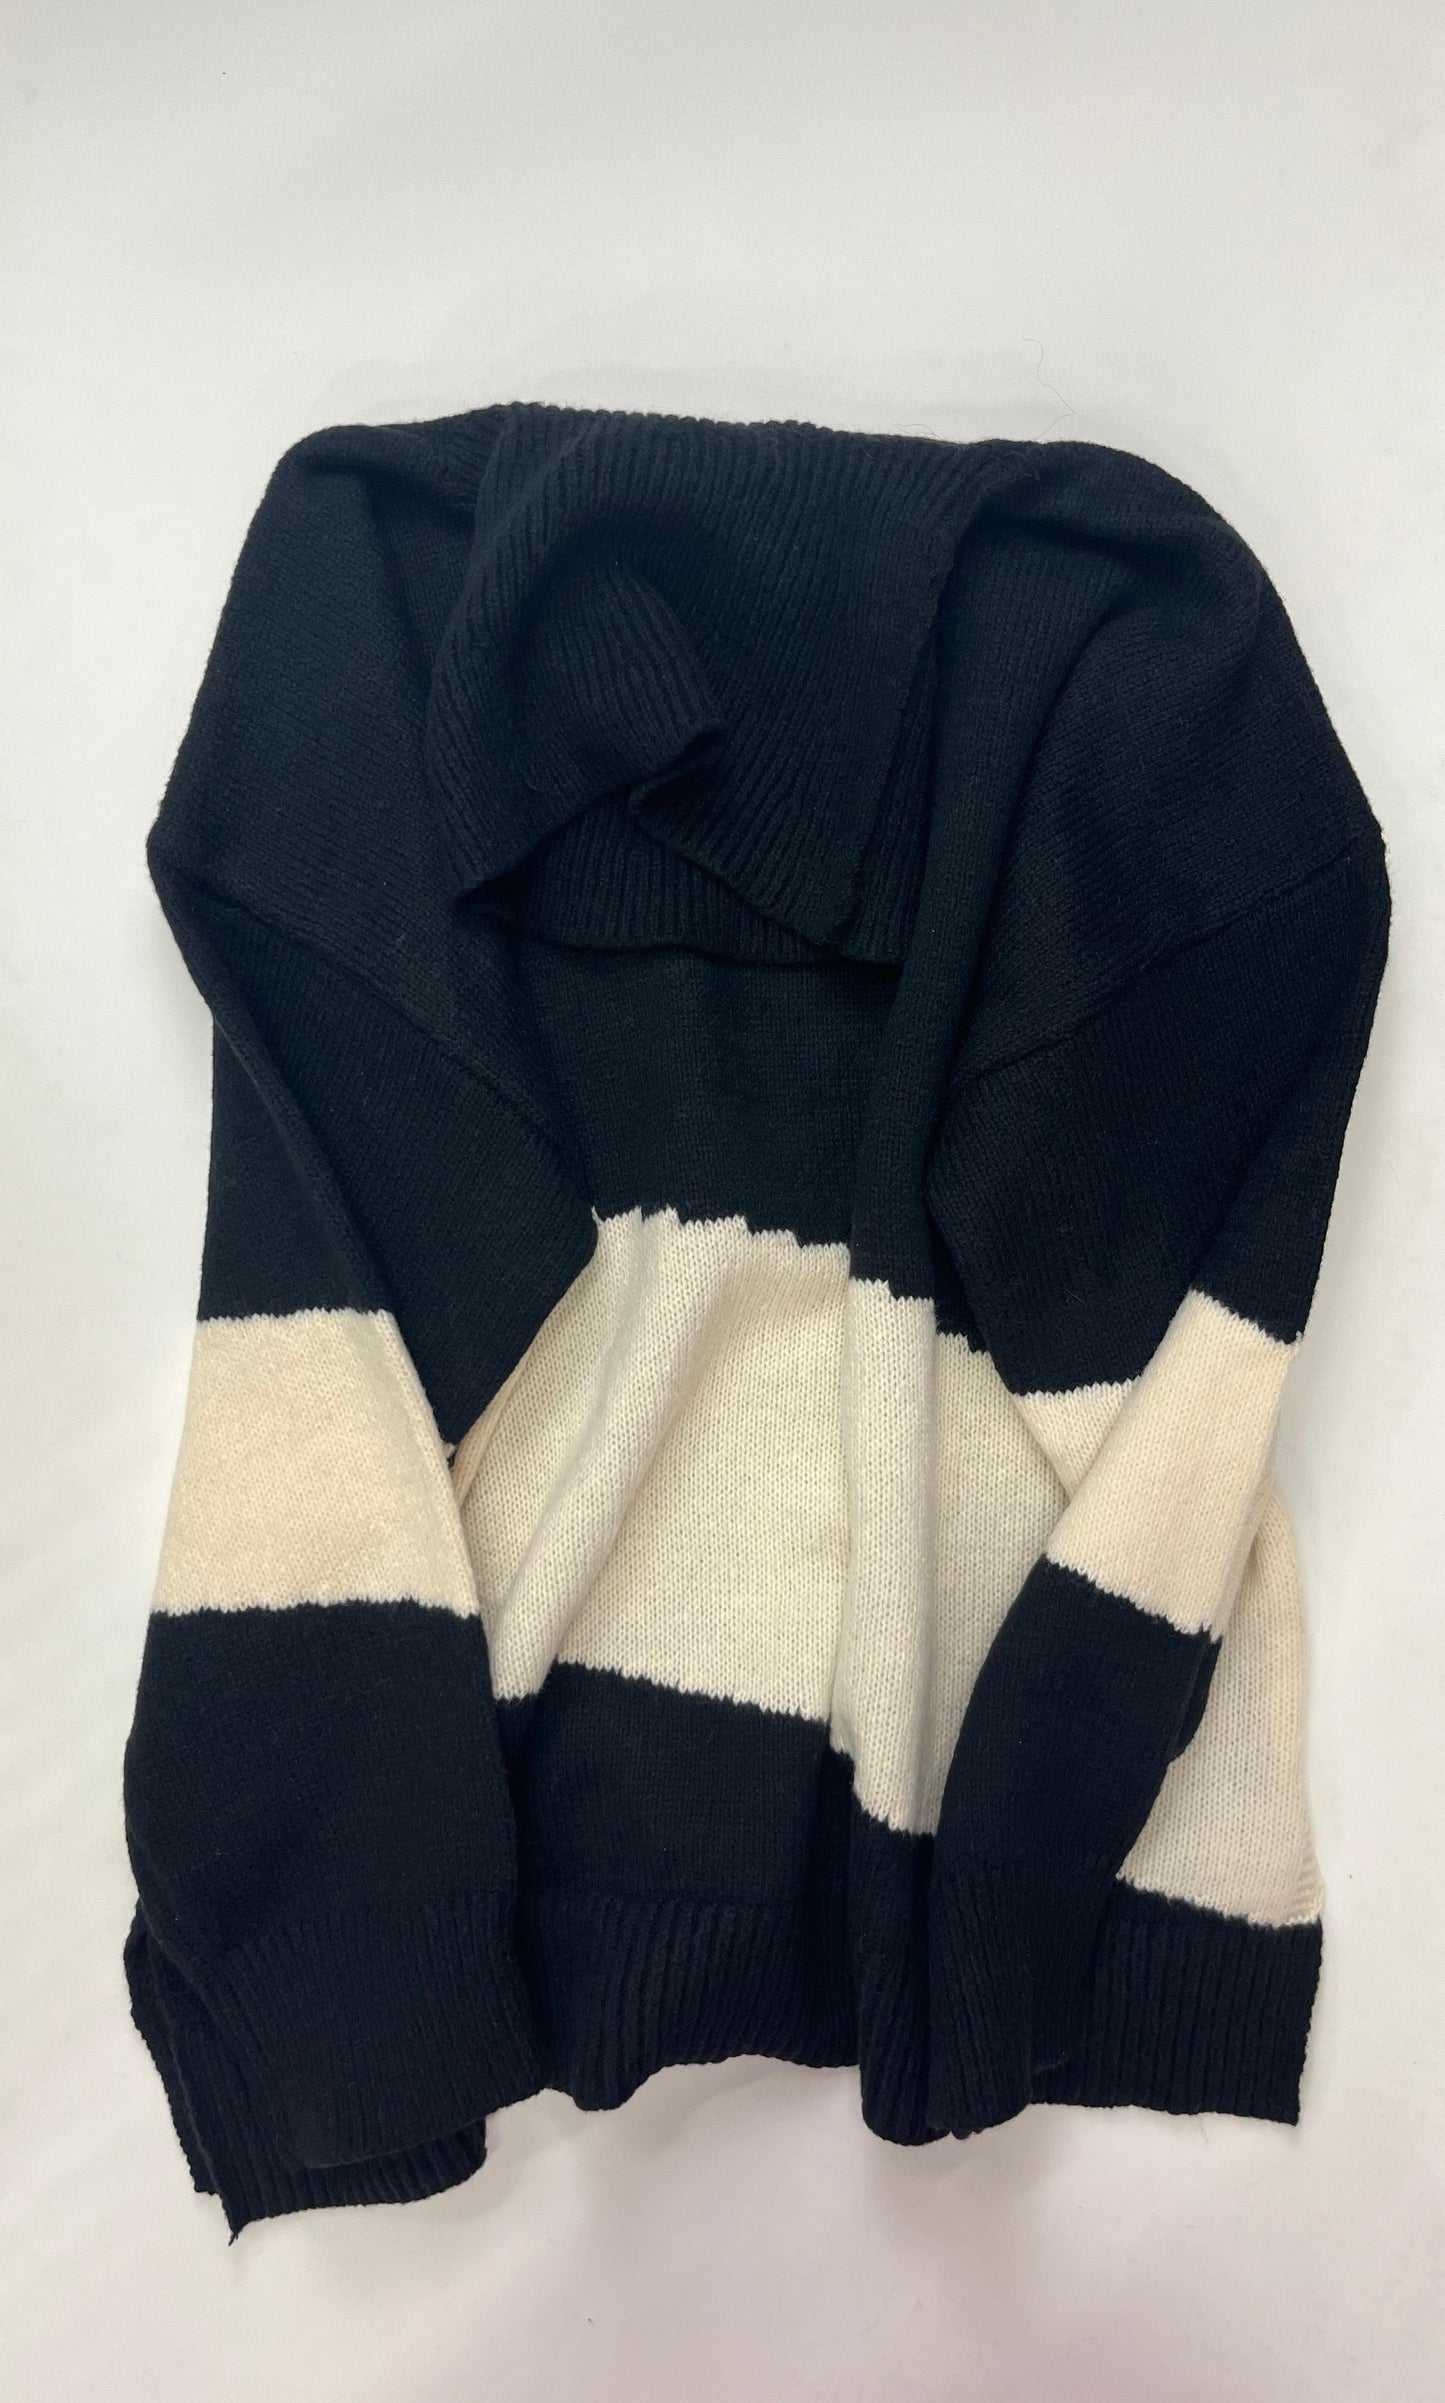 Black Sweater Simple NWT, Size 1x